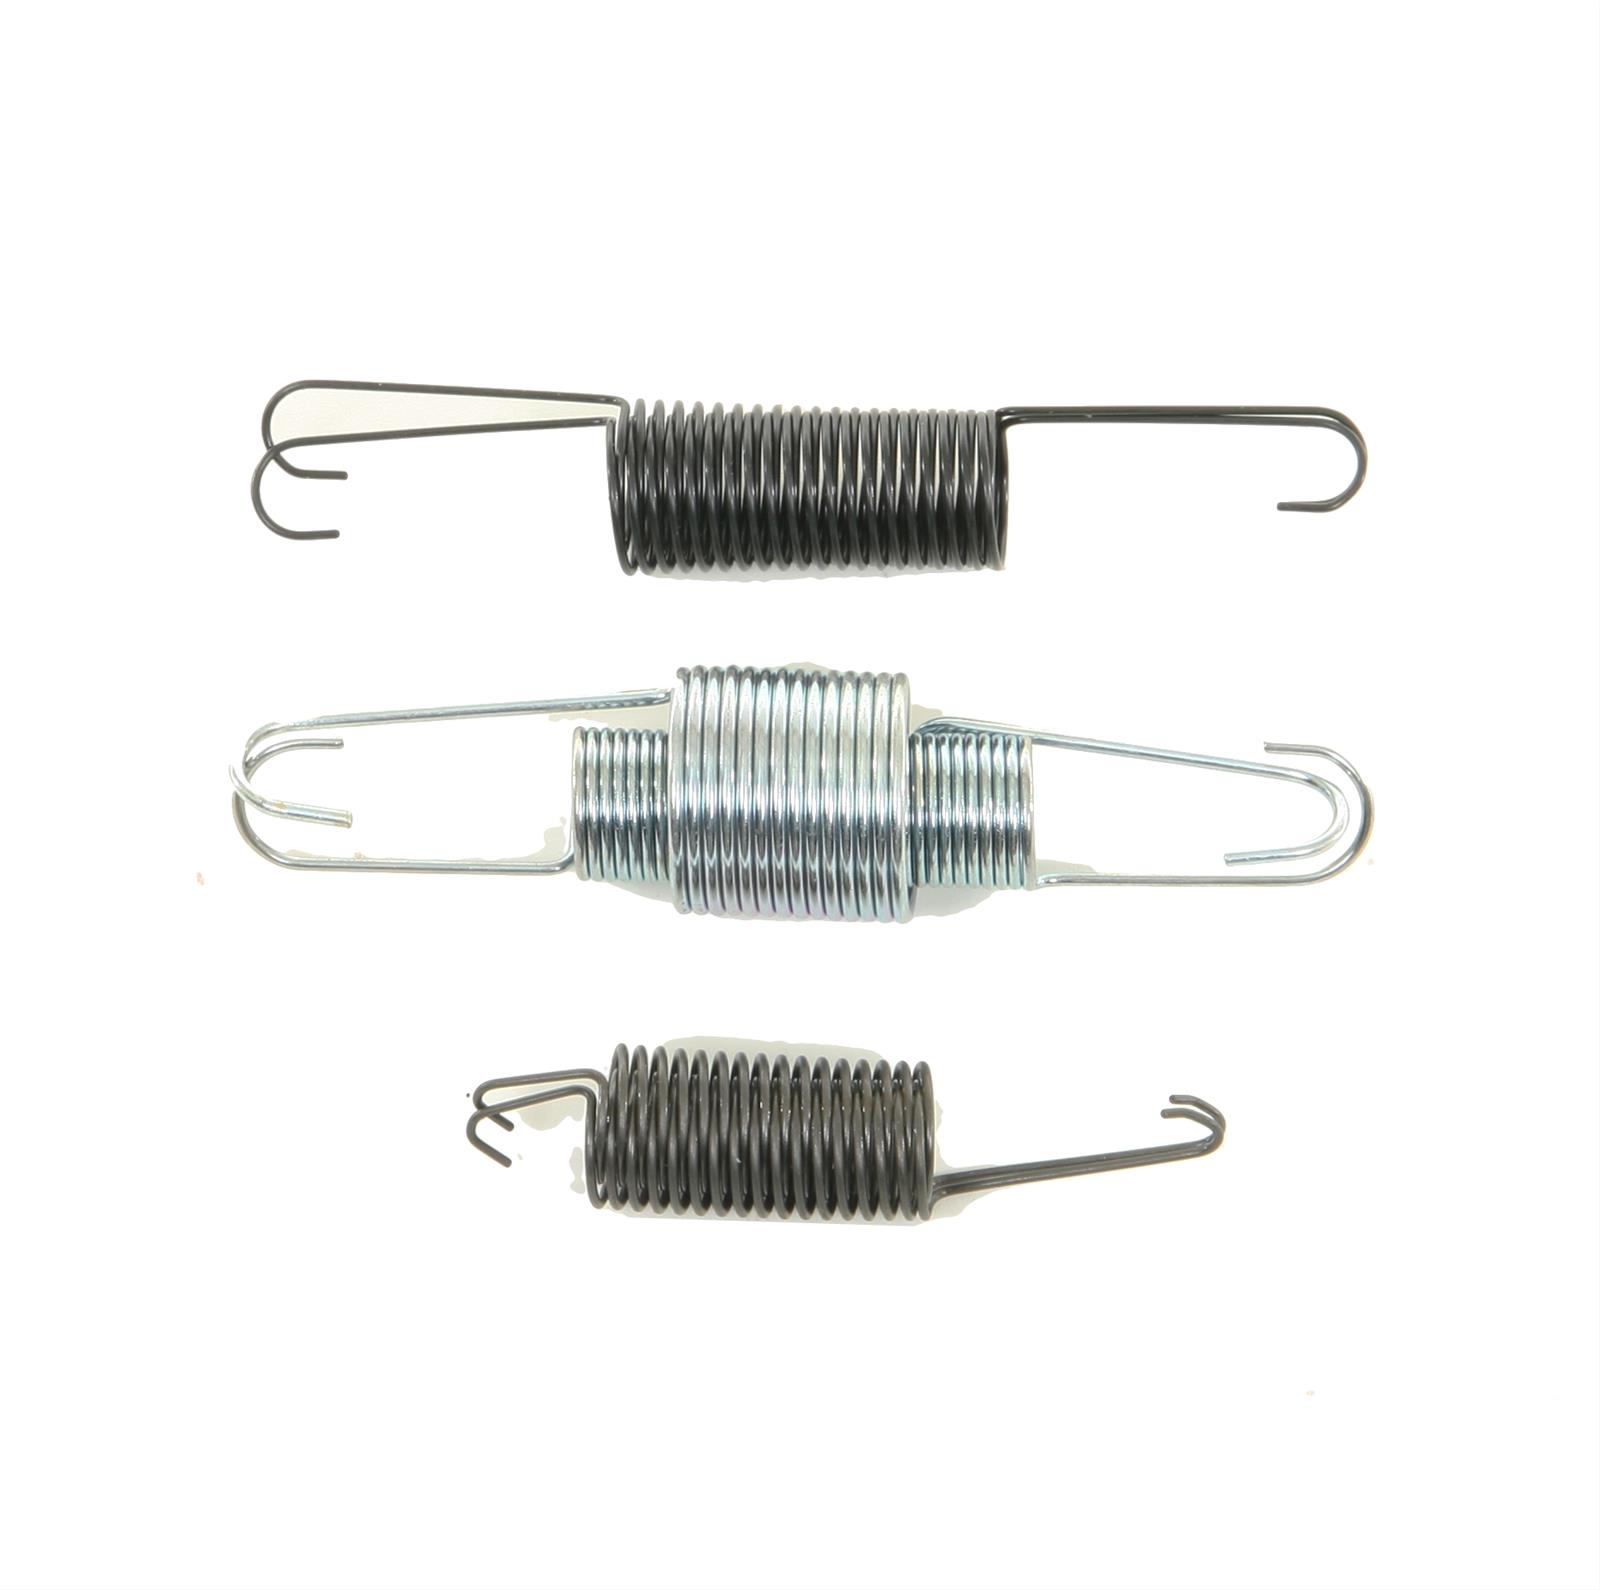 free shipping on orders over 99 at summit racing dorman throttle return springs 59207